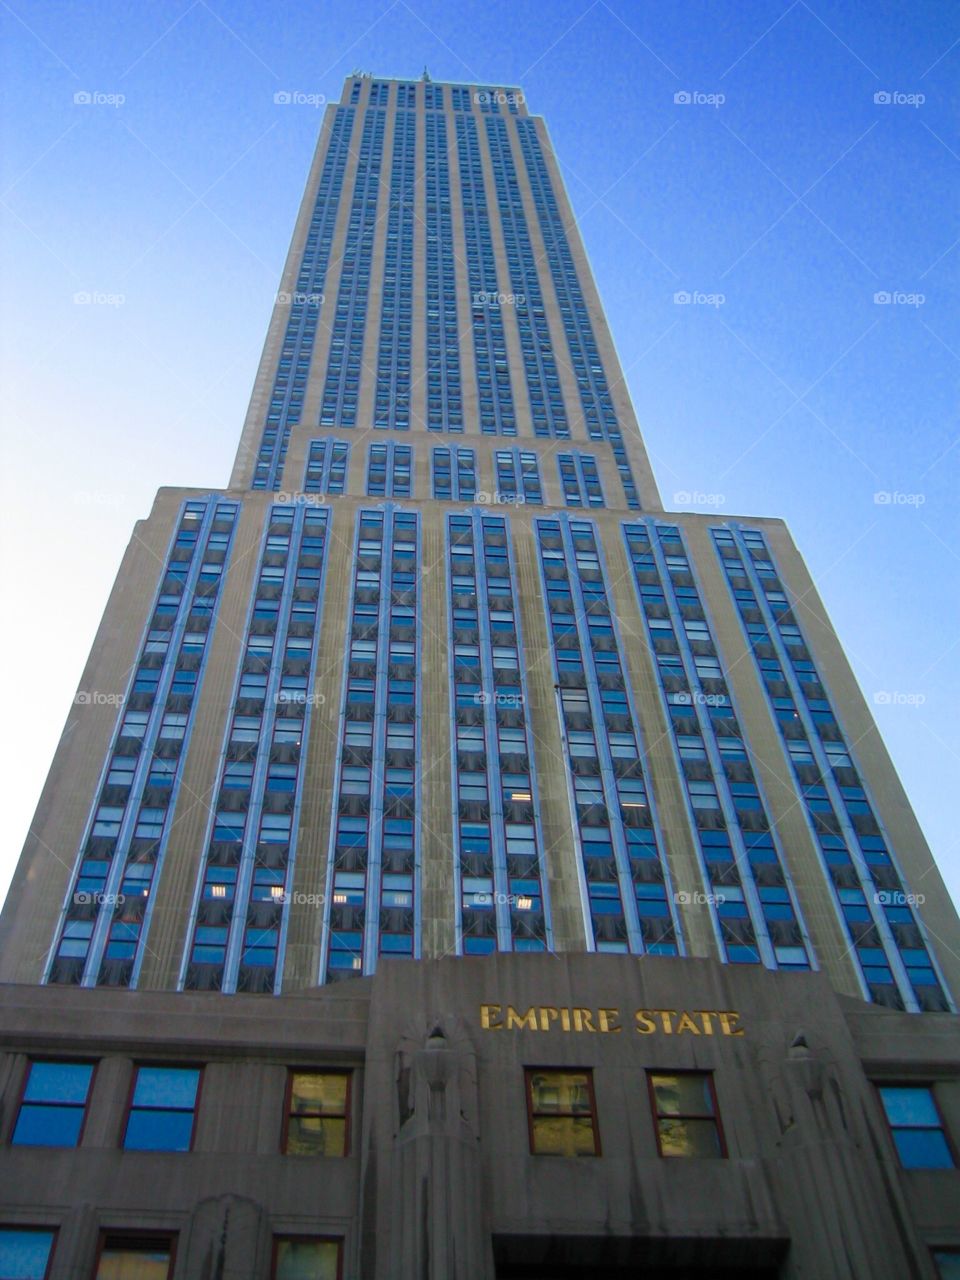 Empire State Building front view